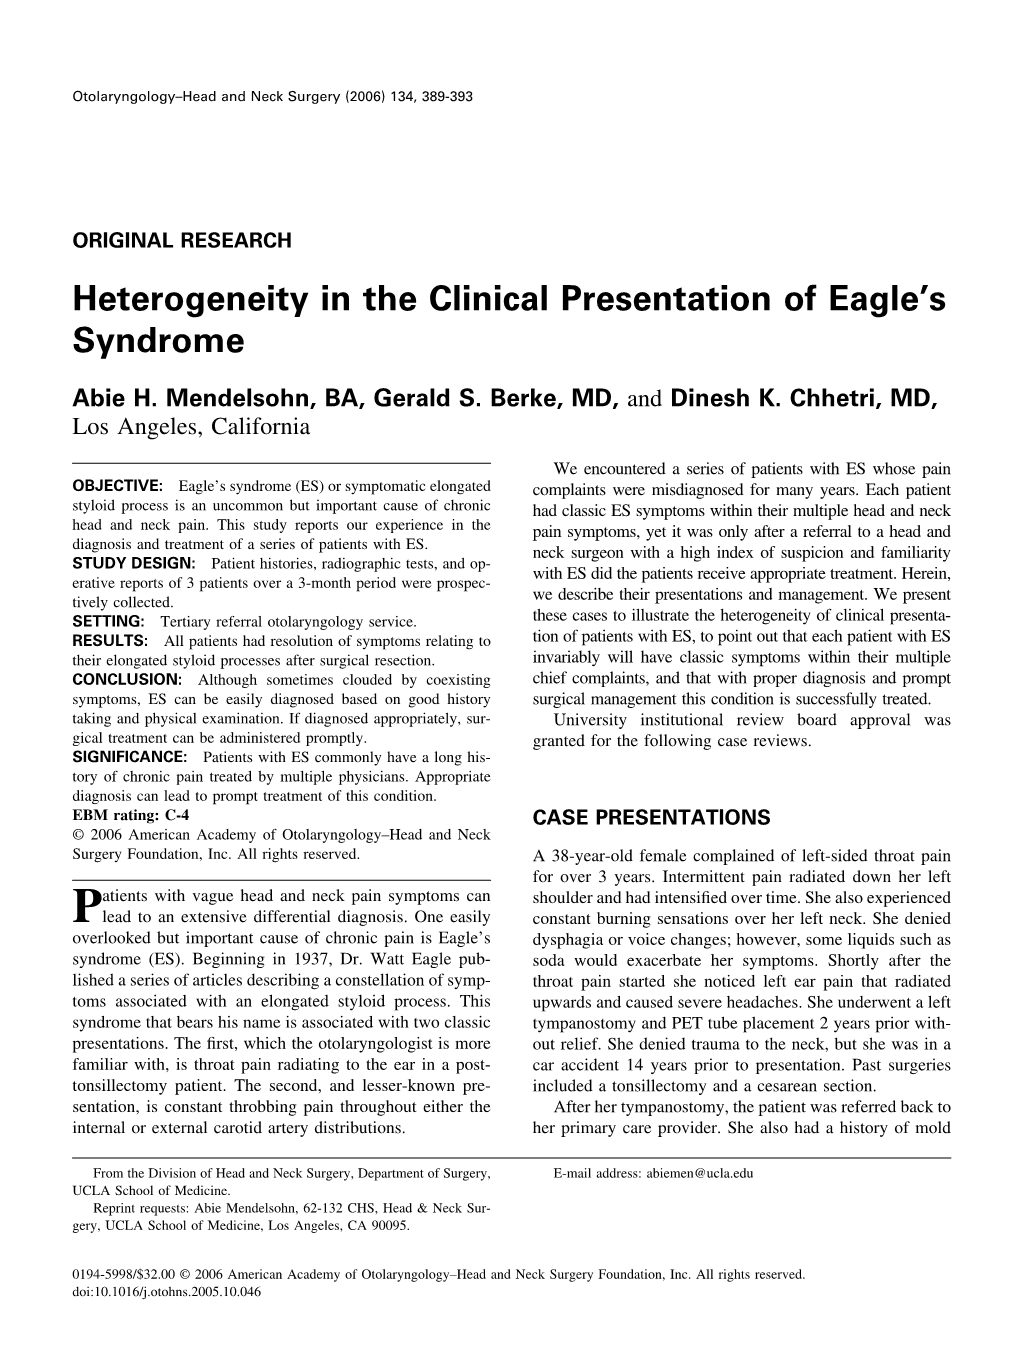 Heterogeneity in the Clinical Presentation of Eagle's Syndrome